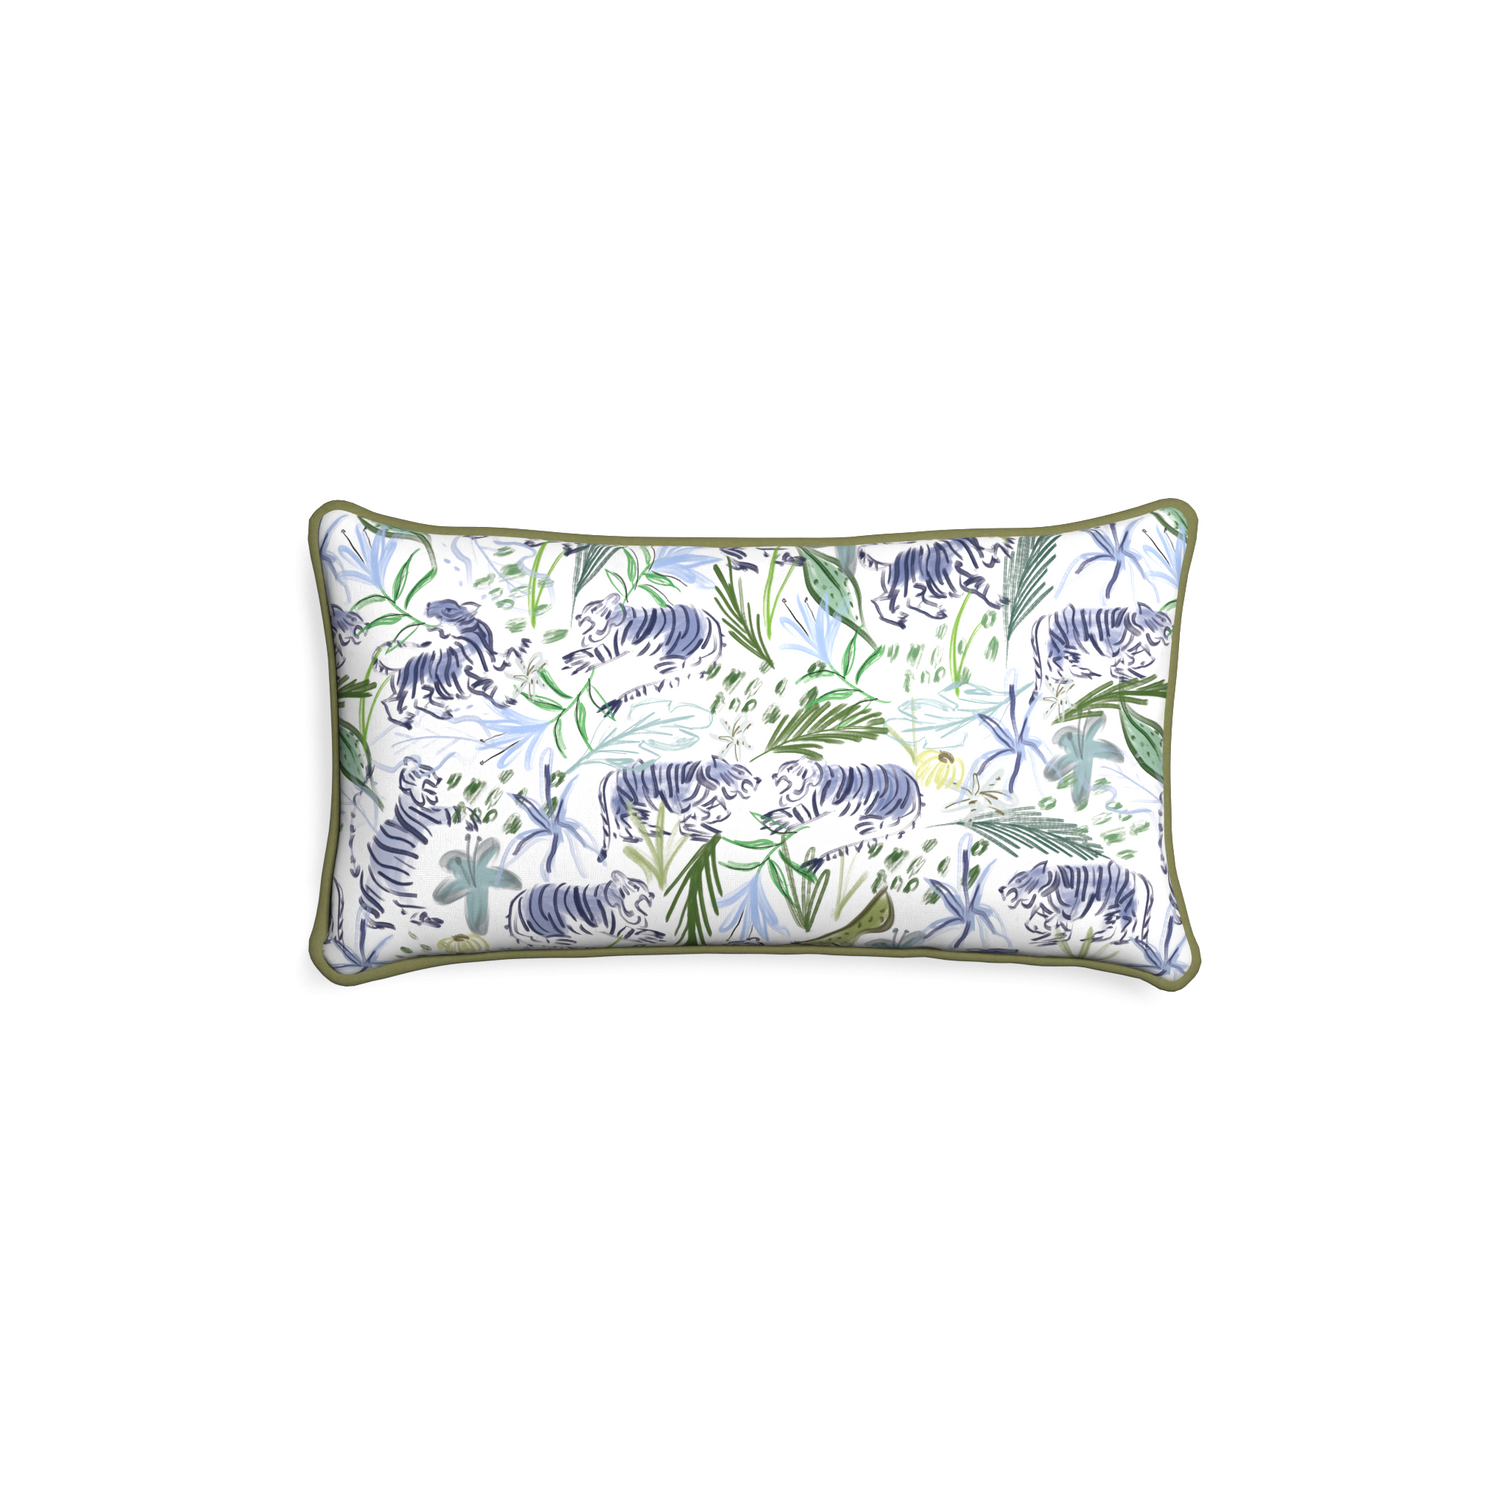 Petite-lumbar frida green custom green tigerpillow with moss piping on white background